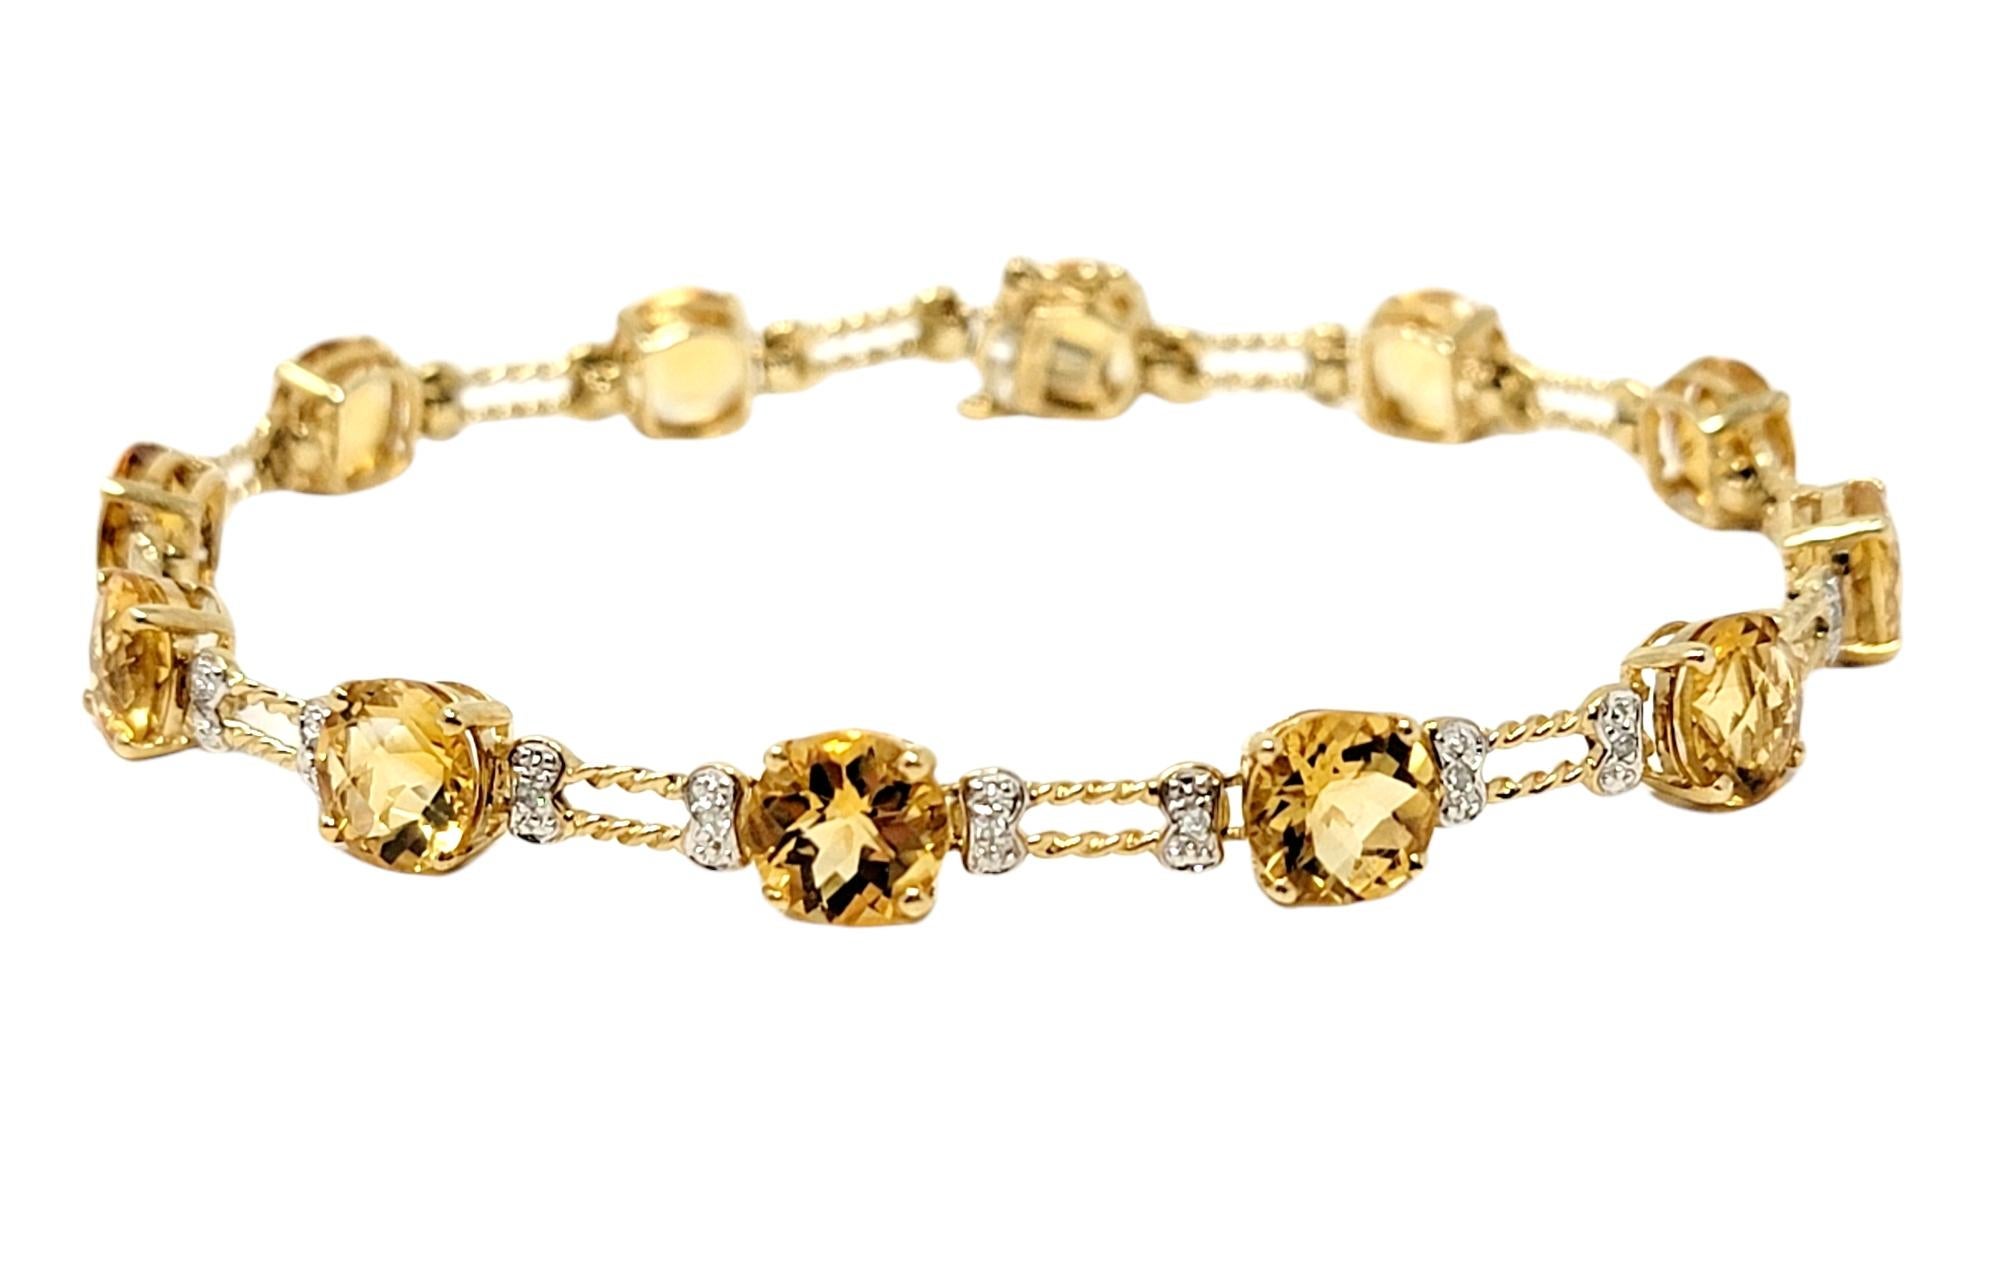 Absolutely lovely citrine and diamond line bracelet. The warm golden hues of the bright yellow stones and the polished yellow gold radiate on the wrist, while the icy white diamonds sparkle beautifully in the light. 

Metal: 10 Karat Yellow